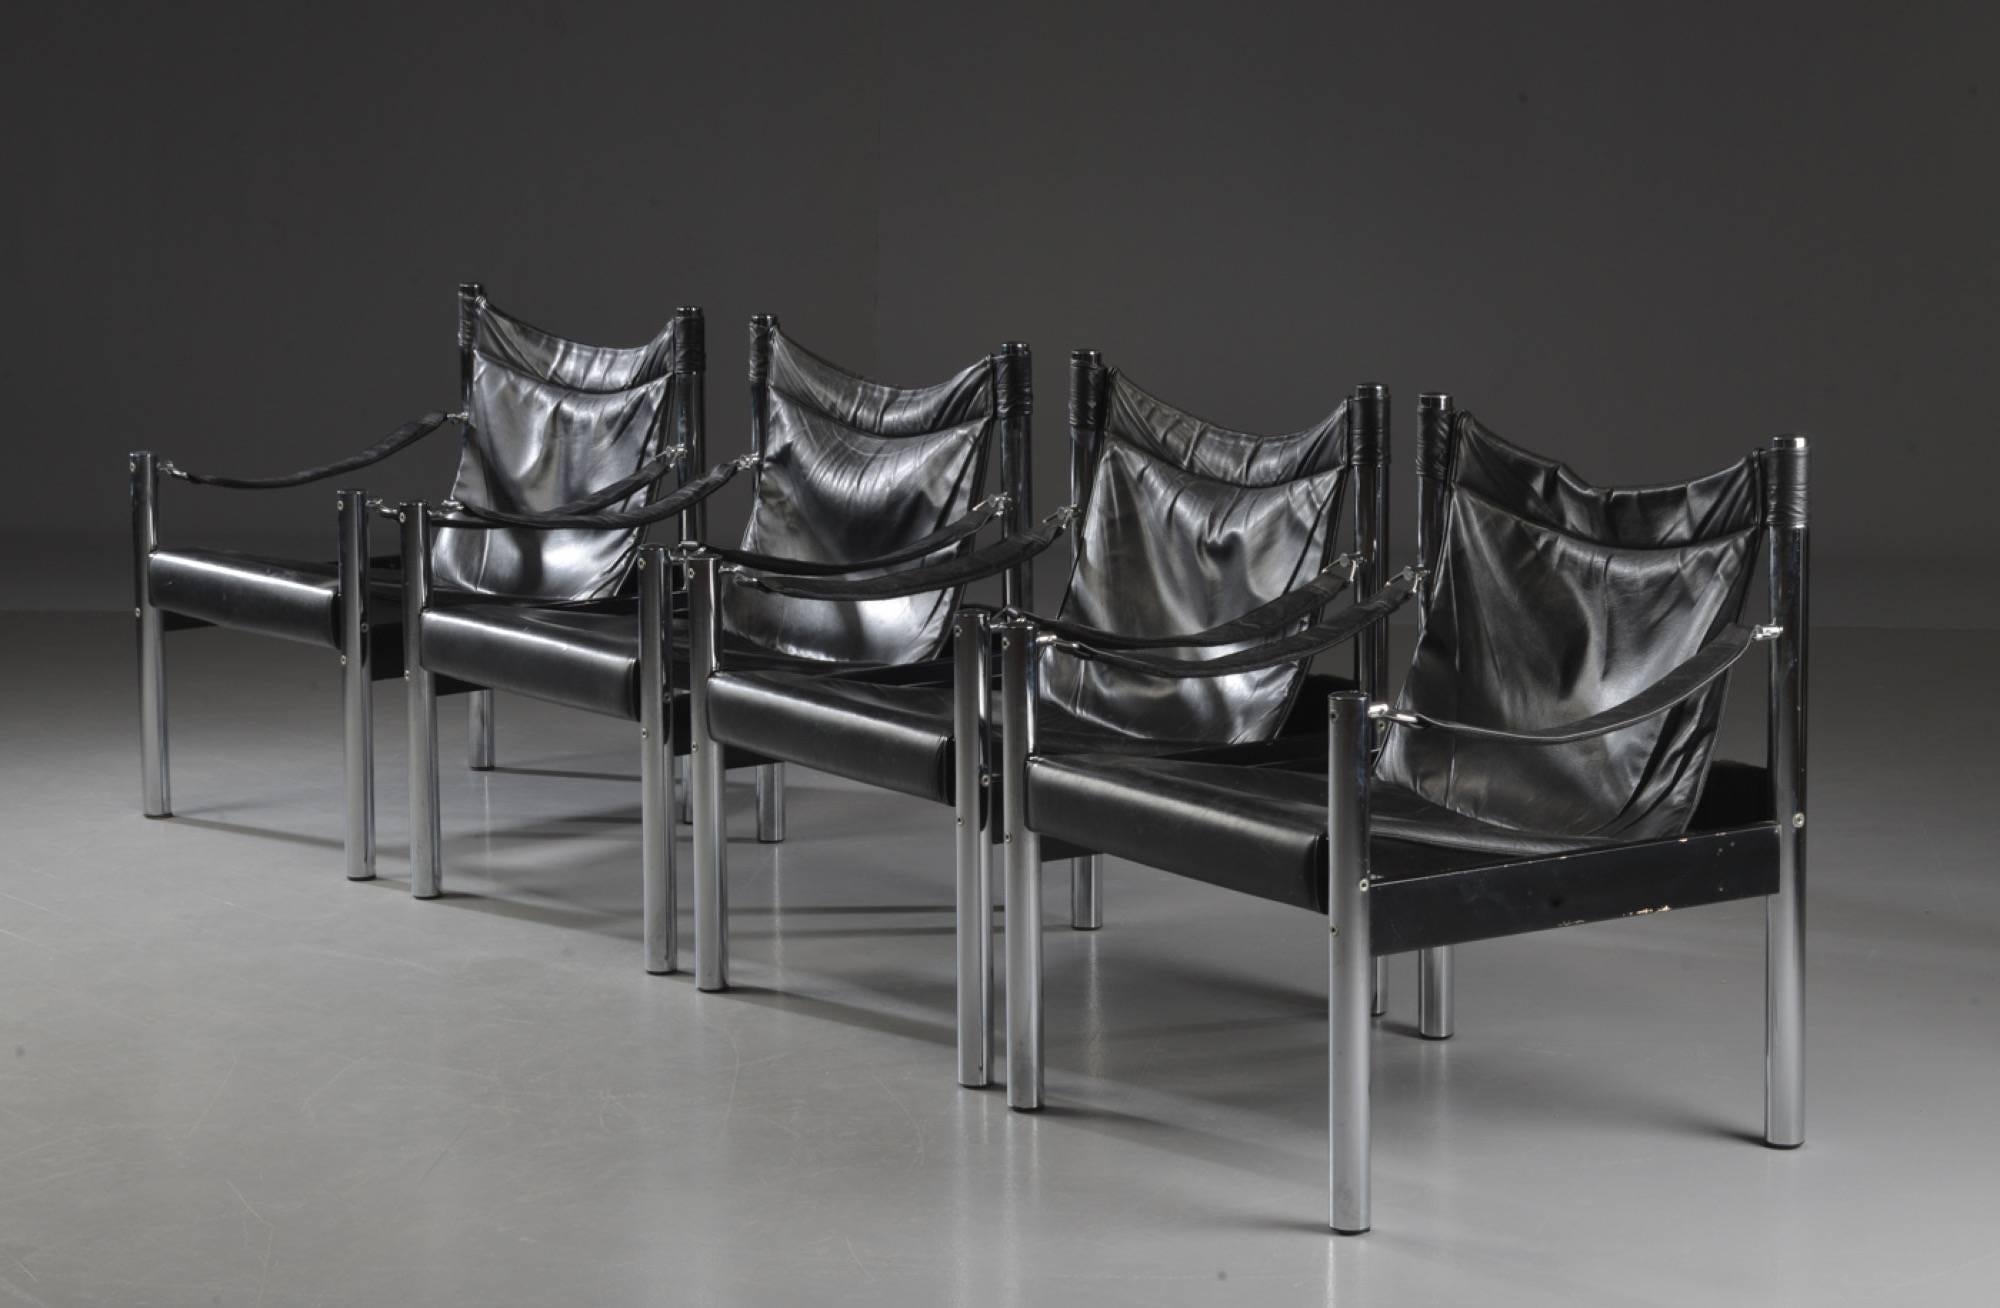 Set of four Safari chairs with chrome steel frame. Seat and back of black leather and black lacquered wood. Released from Olsson furniture.